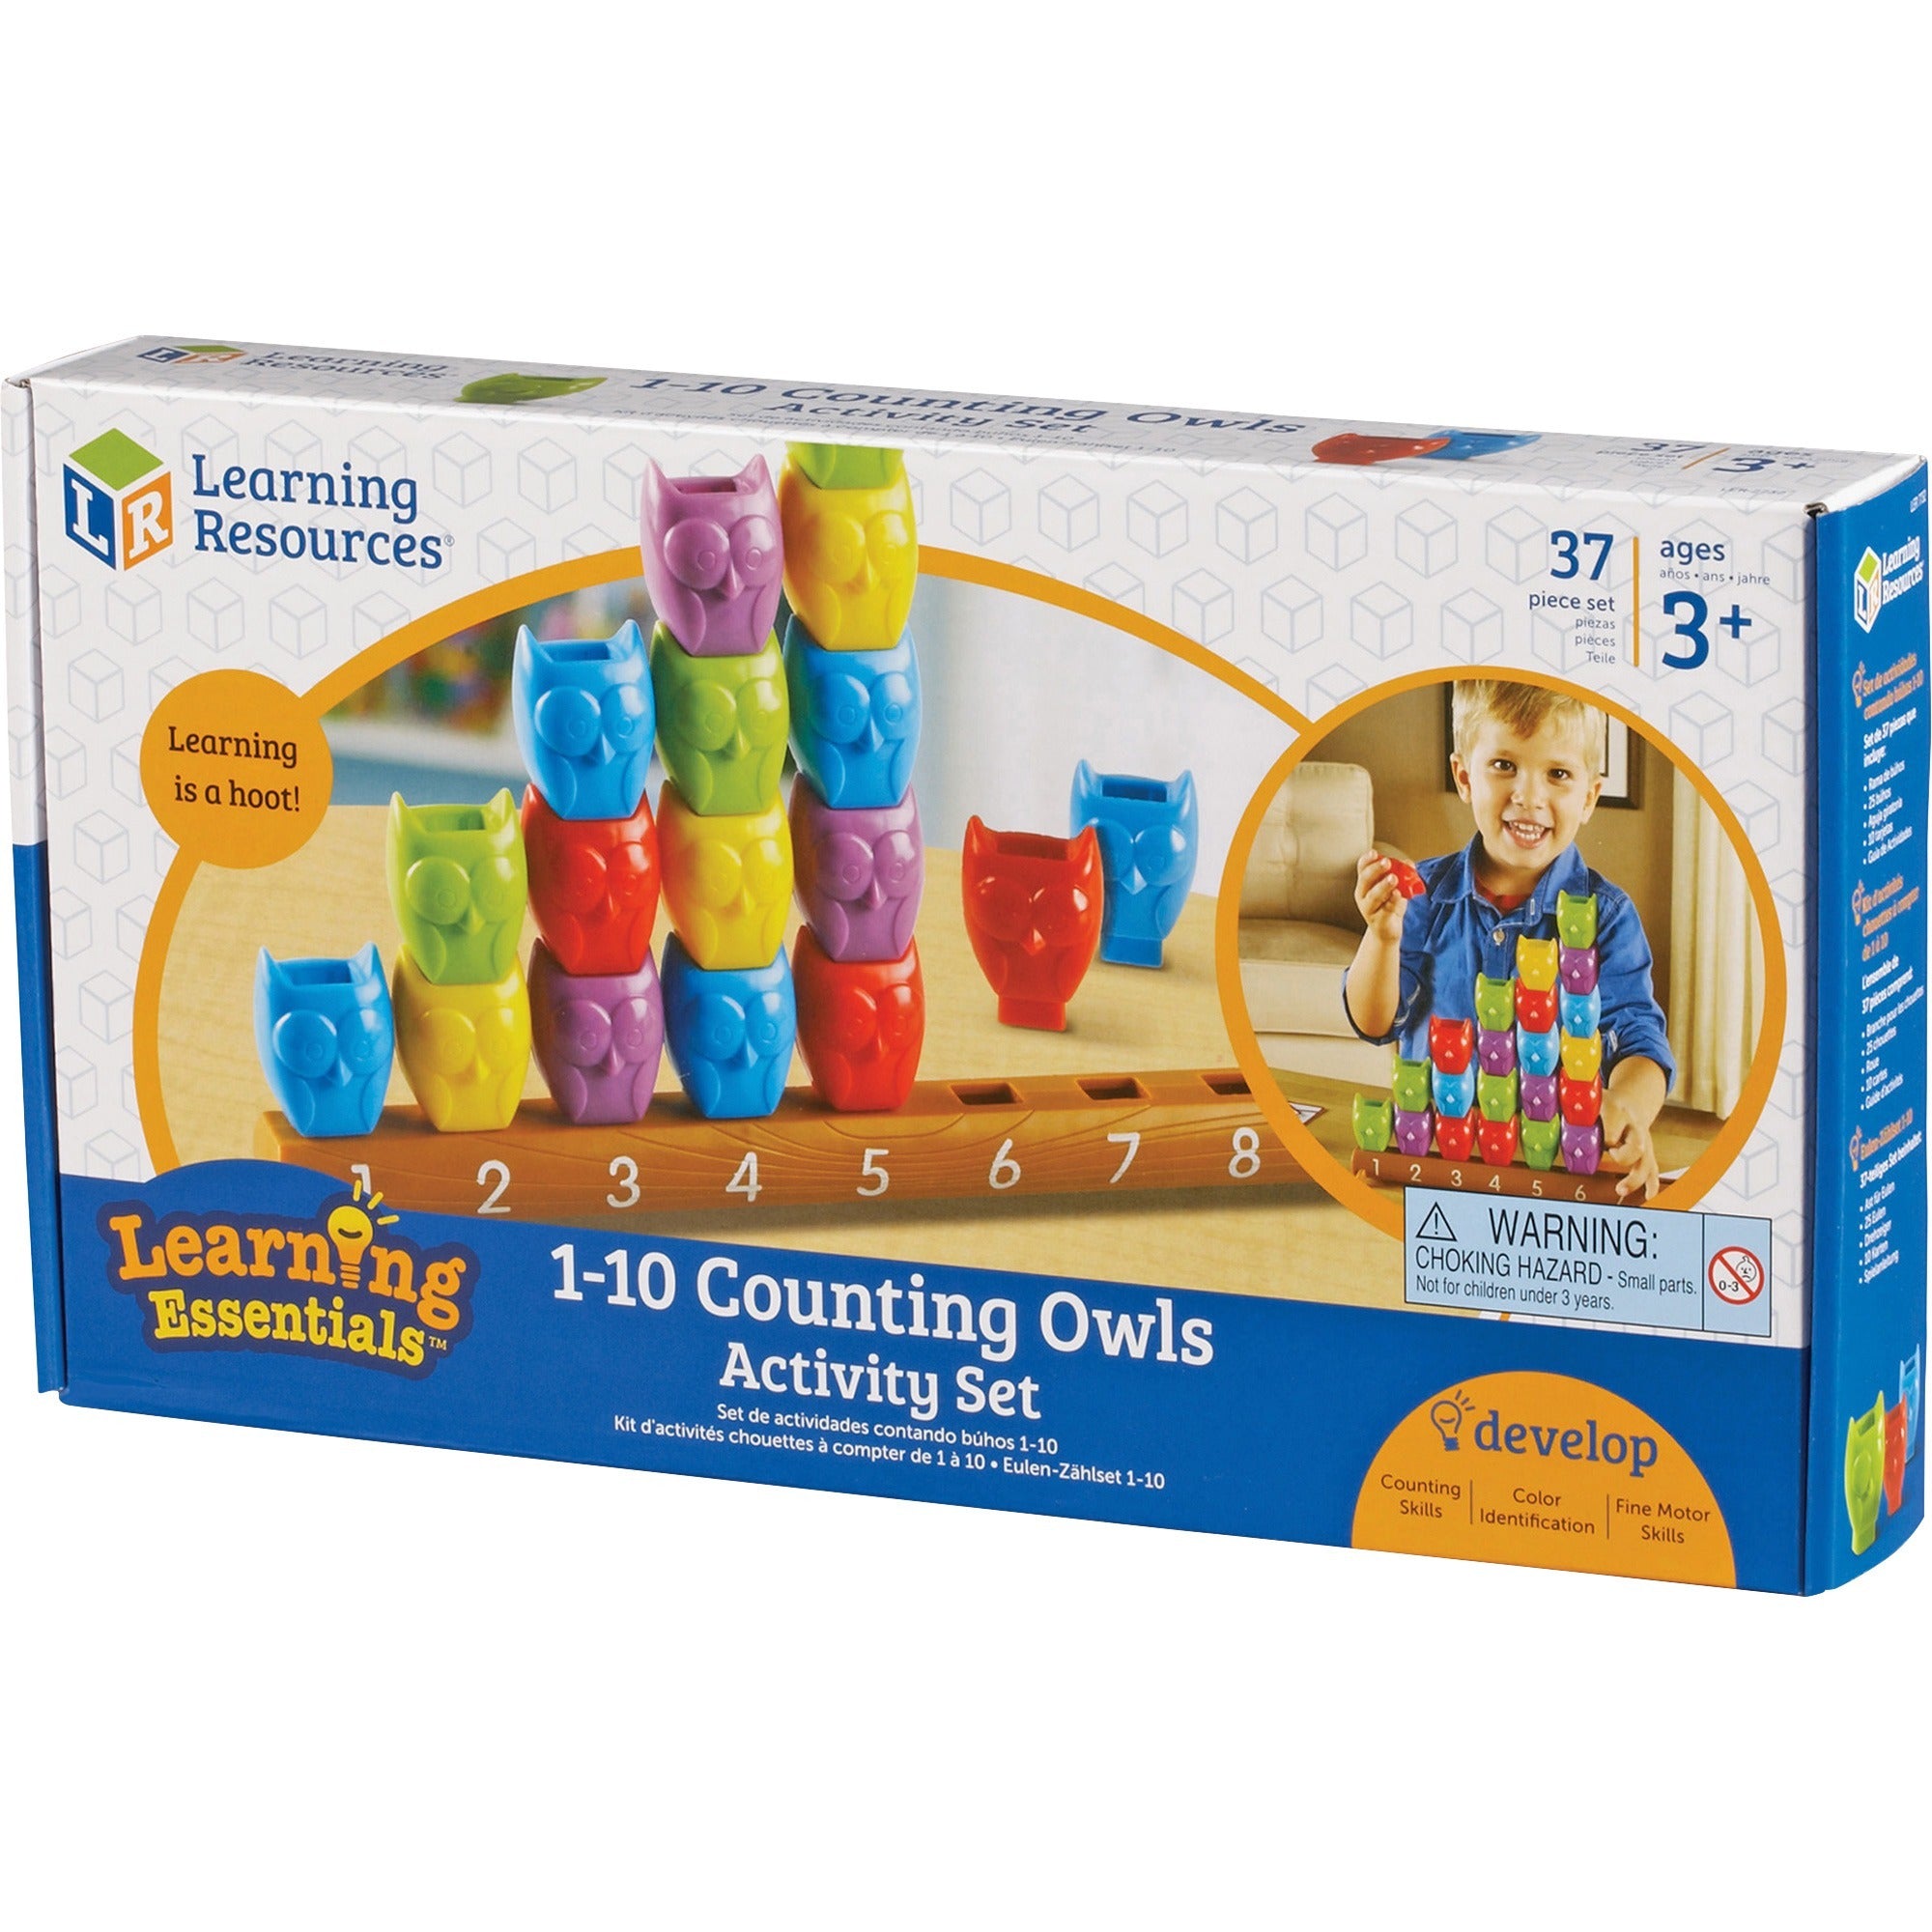 Learning Resources 1-10 Counting Owl Activity Set - Theme/Subject: Learning - Skill Learning: Counting, Addition, Subtraction, Patterning, Number, Sorting, Color Identification - 3+ - 1 / Set - 